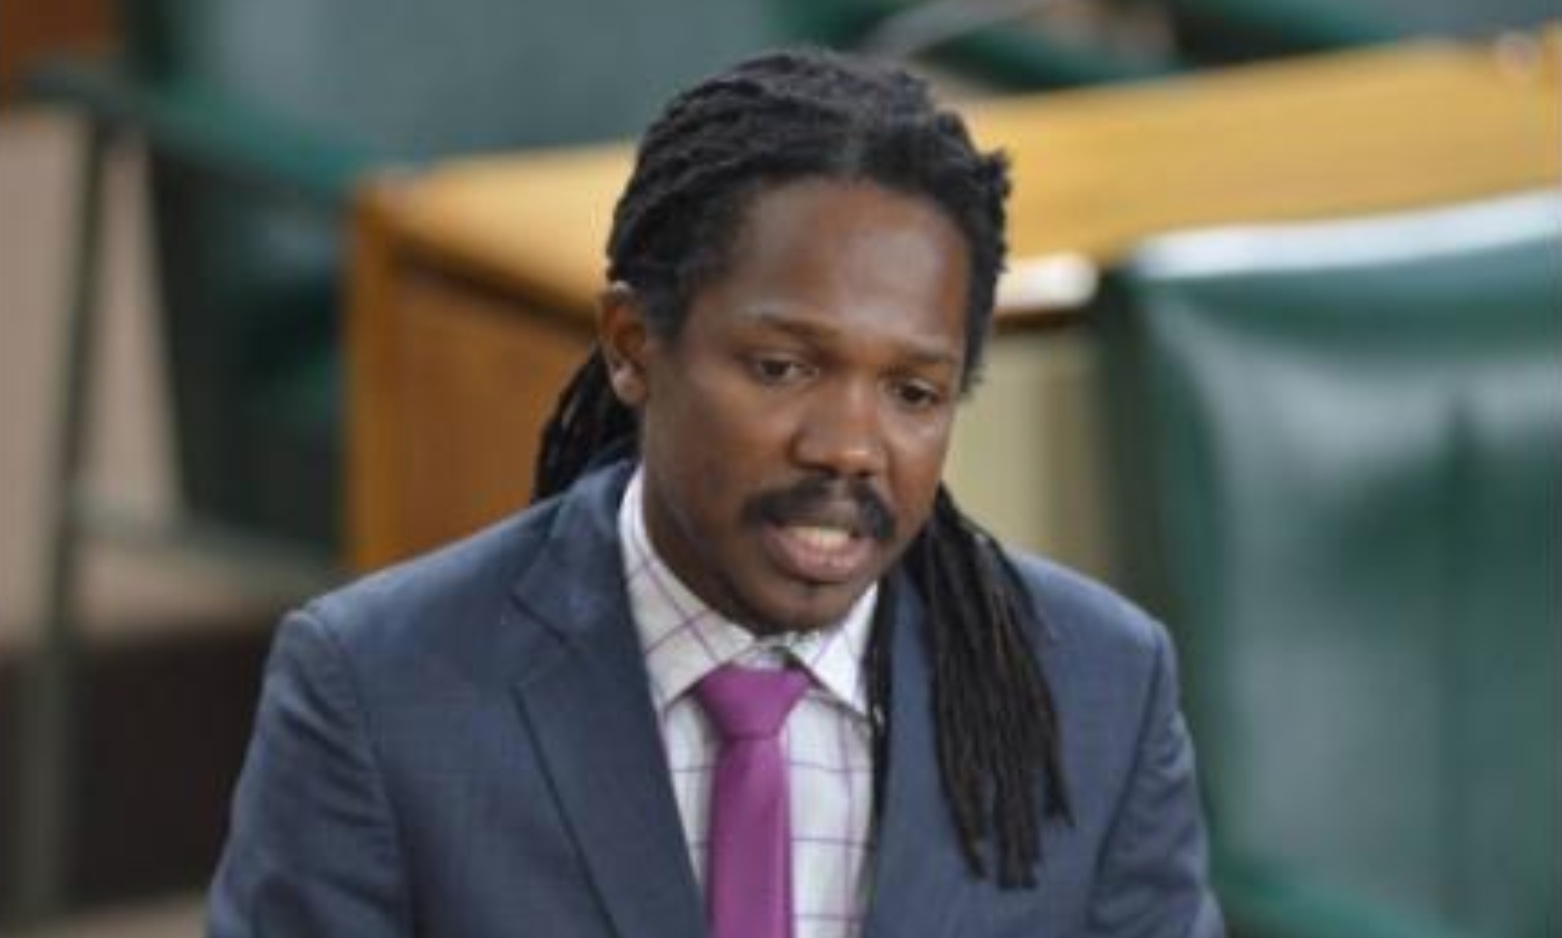 Damion Crawford Gives Intense Speech Sparking Several Arguments - Video